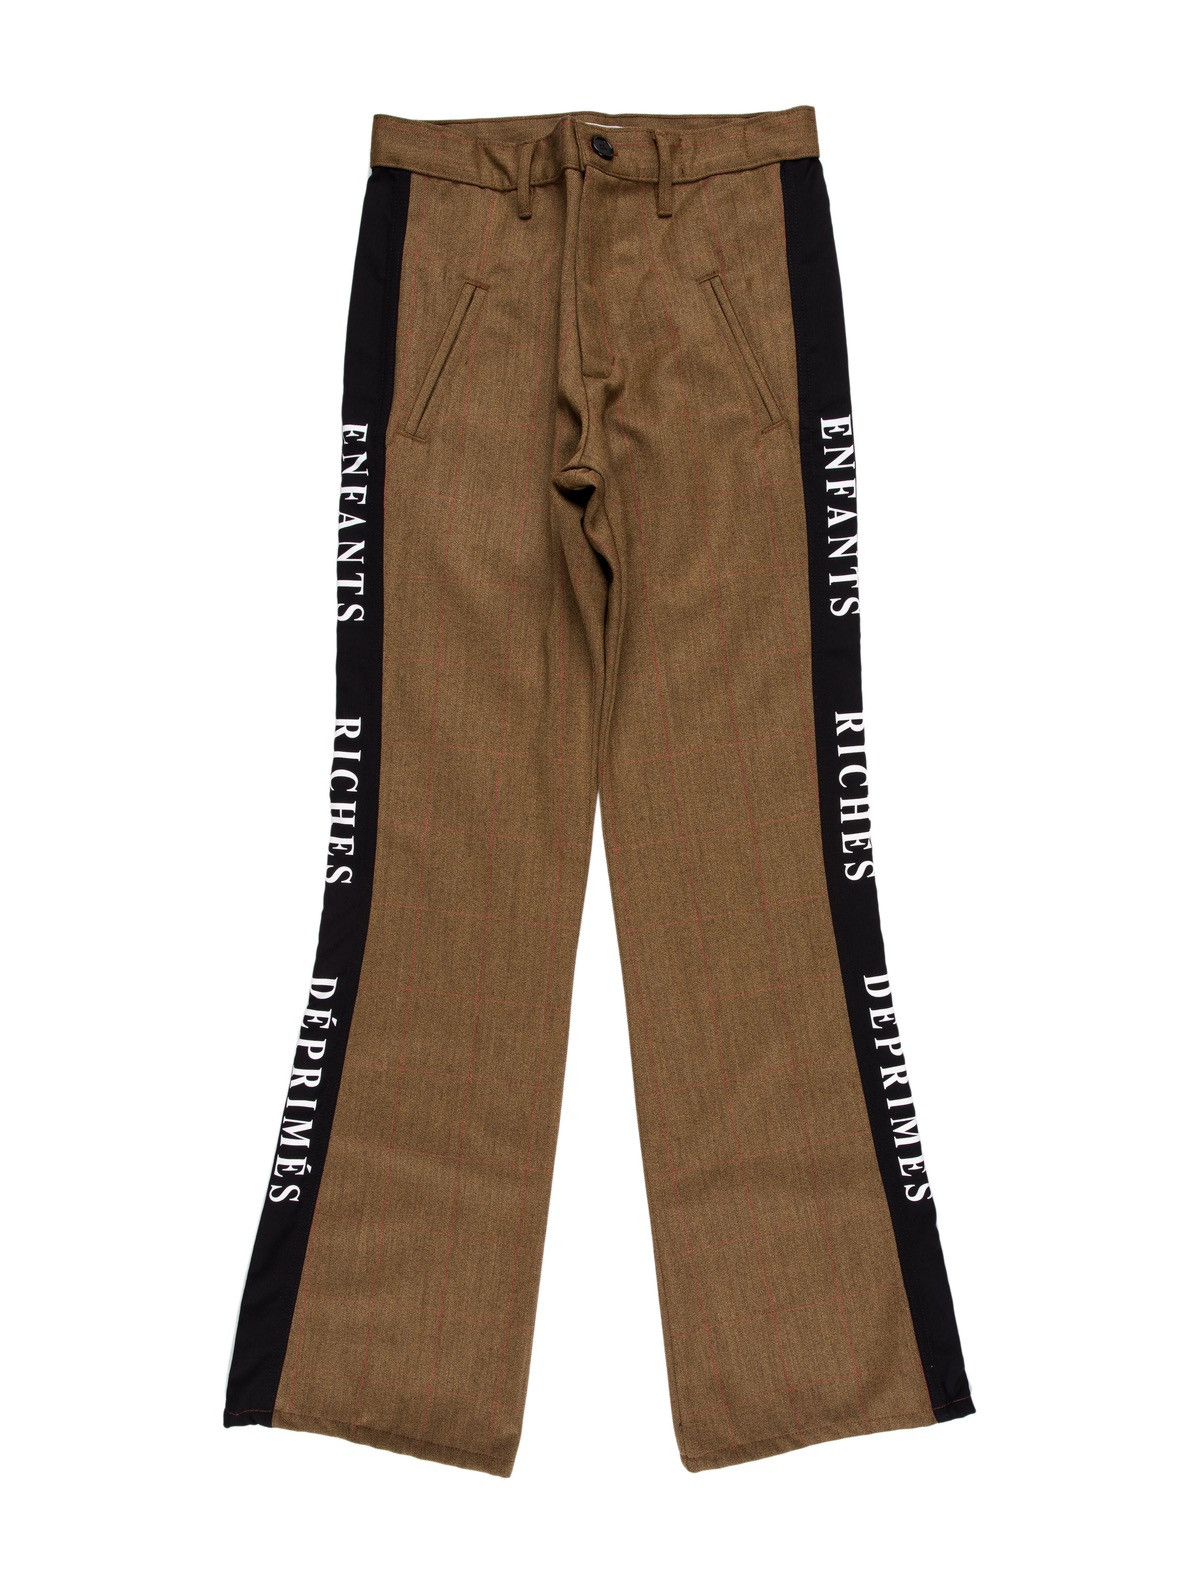 Pre-owned Enfants Riches Deprimes Ss18 Christie's Plaid Flared Trouser In Camel